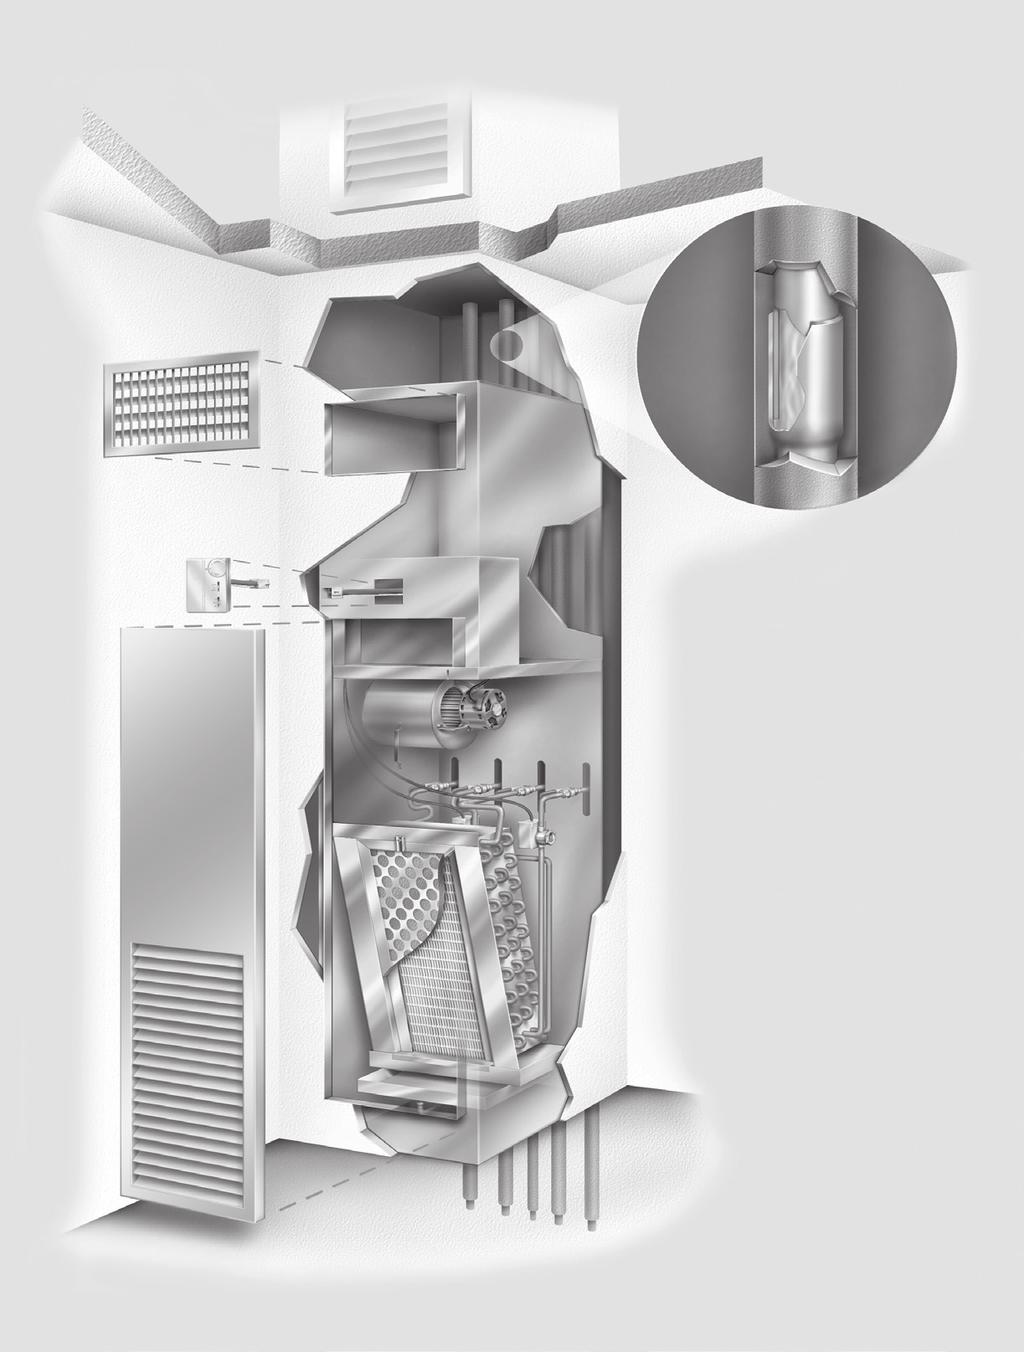 Versatility In esign and Installation Modular Hi-Rise fan coil systems offer versatile unit arrangements made possible as a factory-assembled and integrated package.